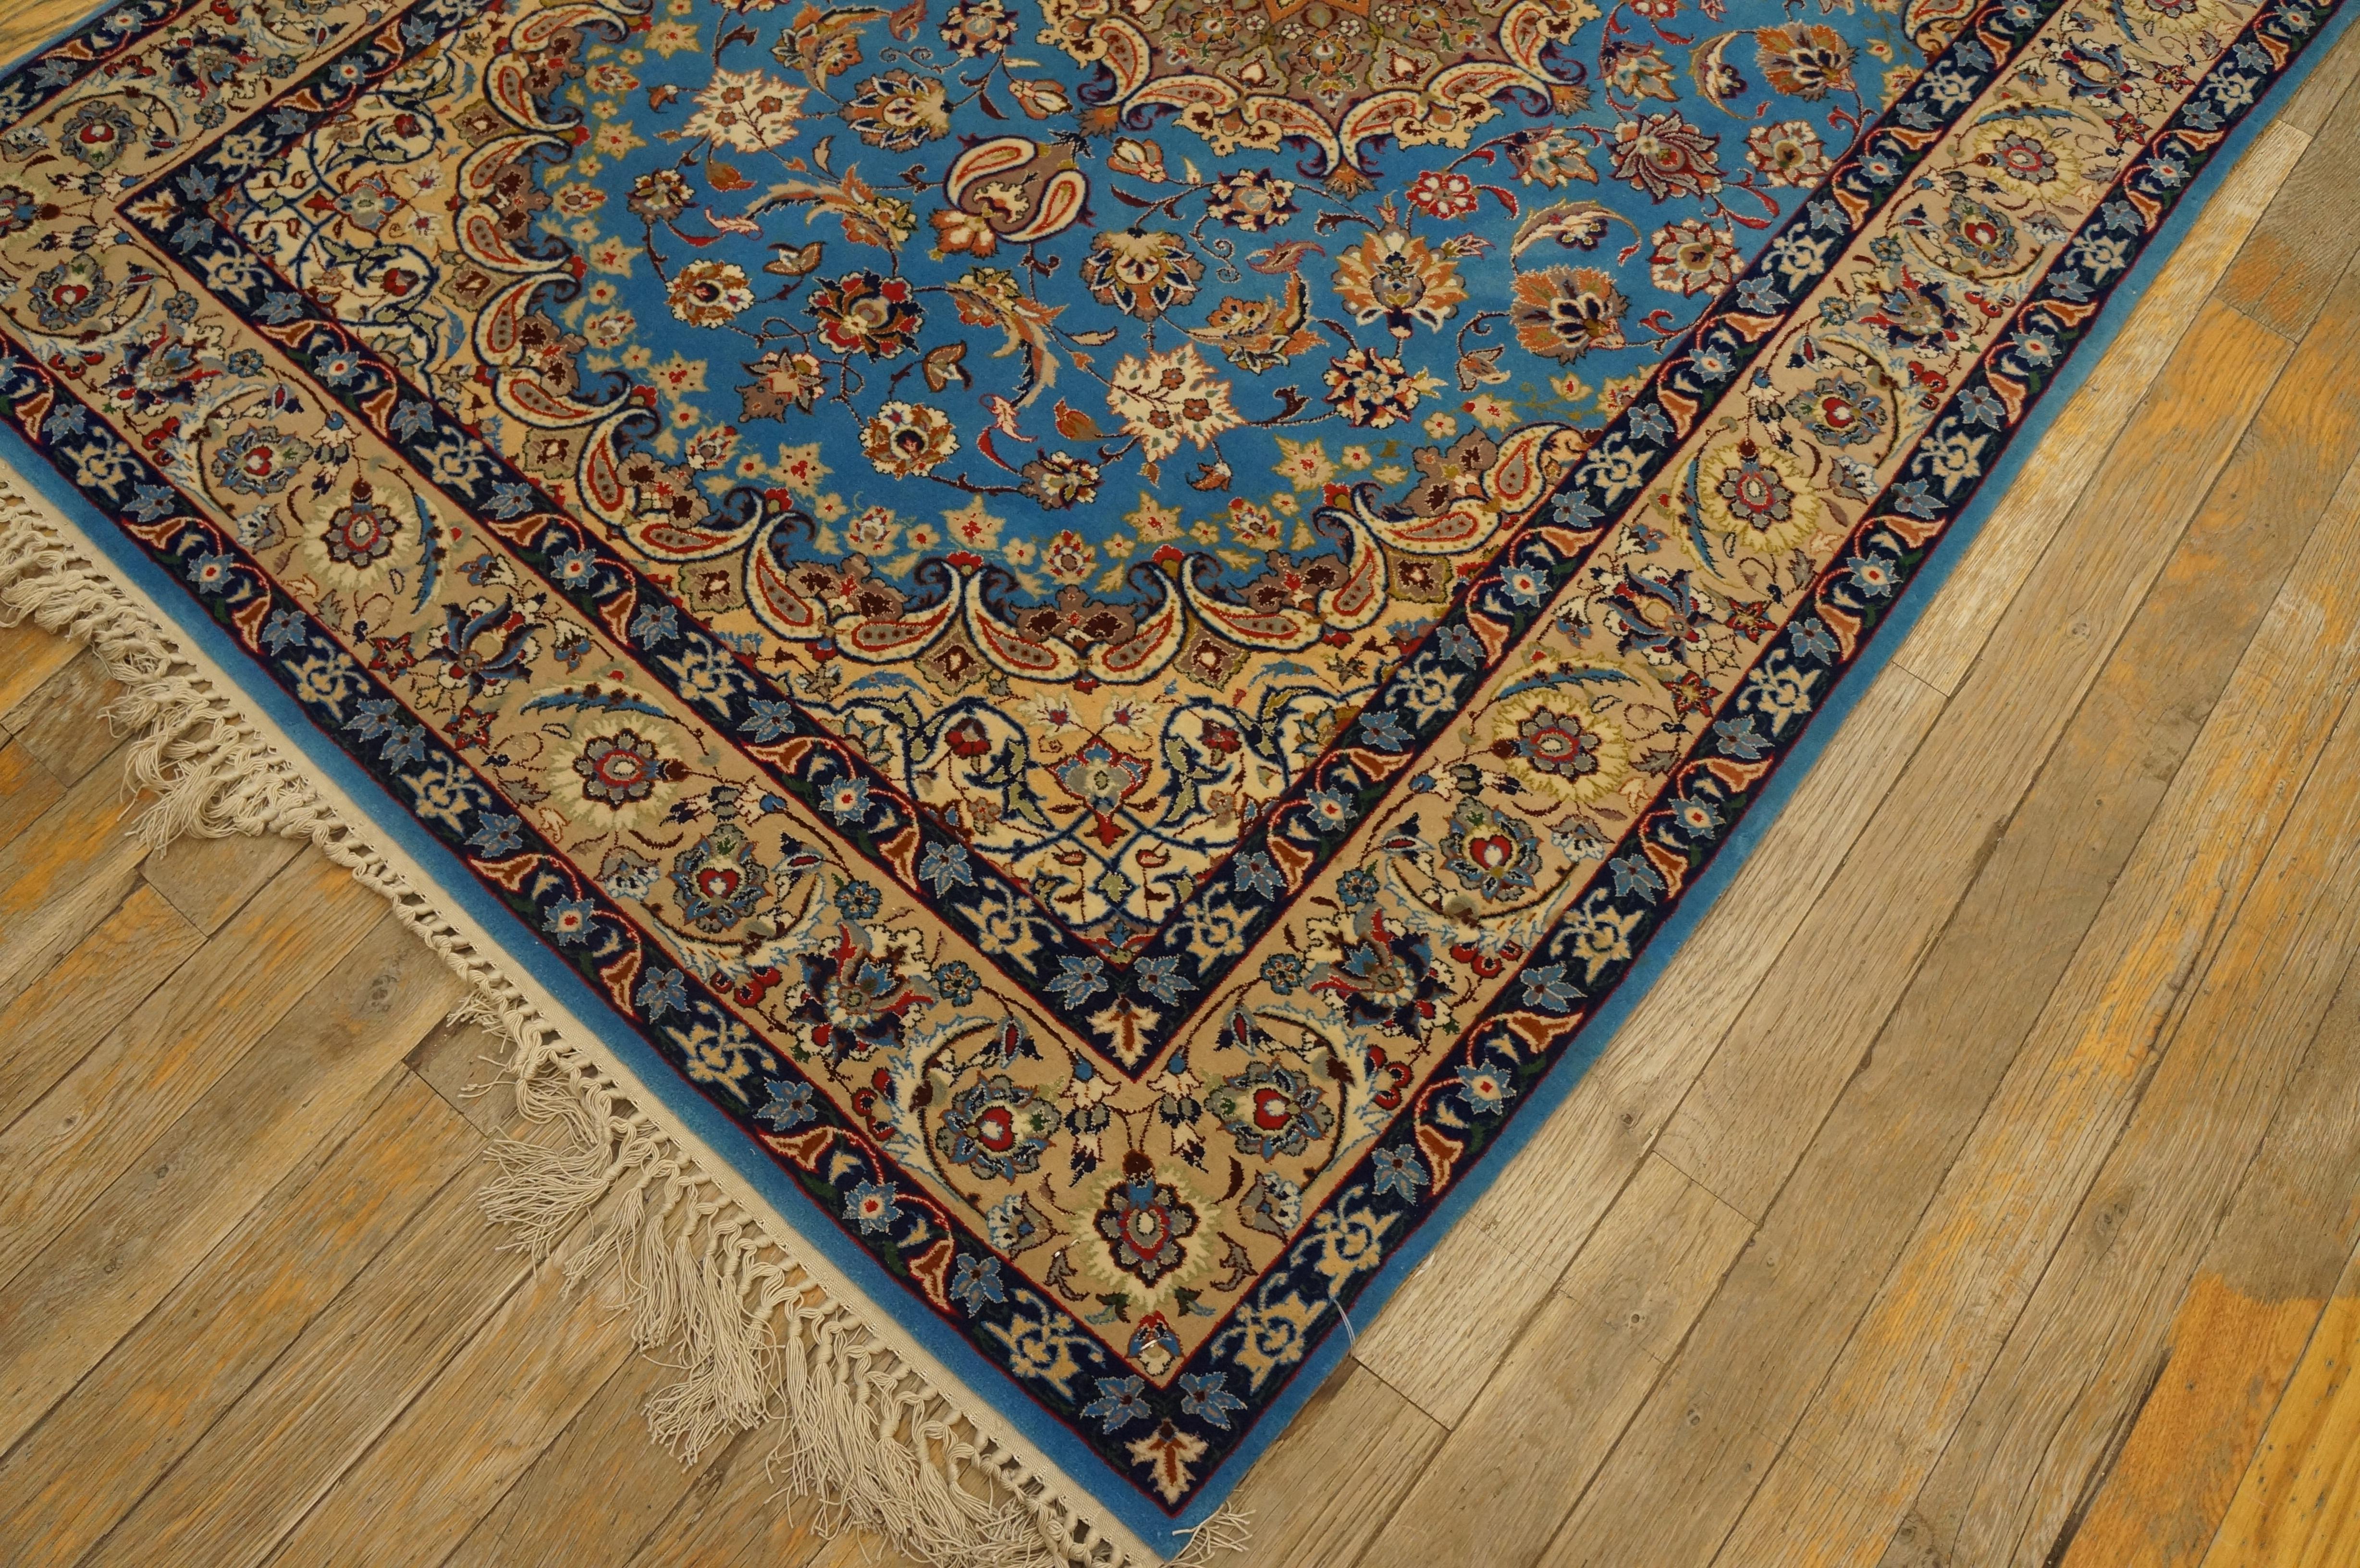 Hand-Knotted Mid 20th Century Isfahan Carpet with Silk Highlights ( 3'6